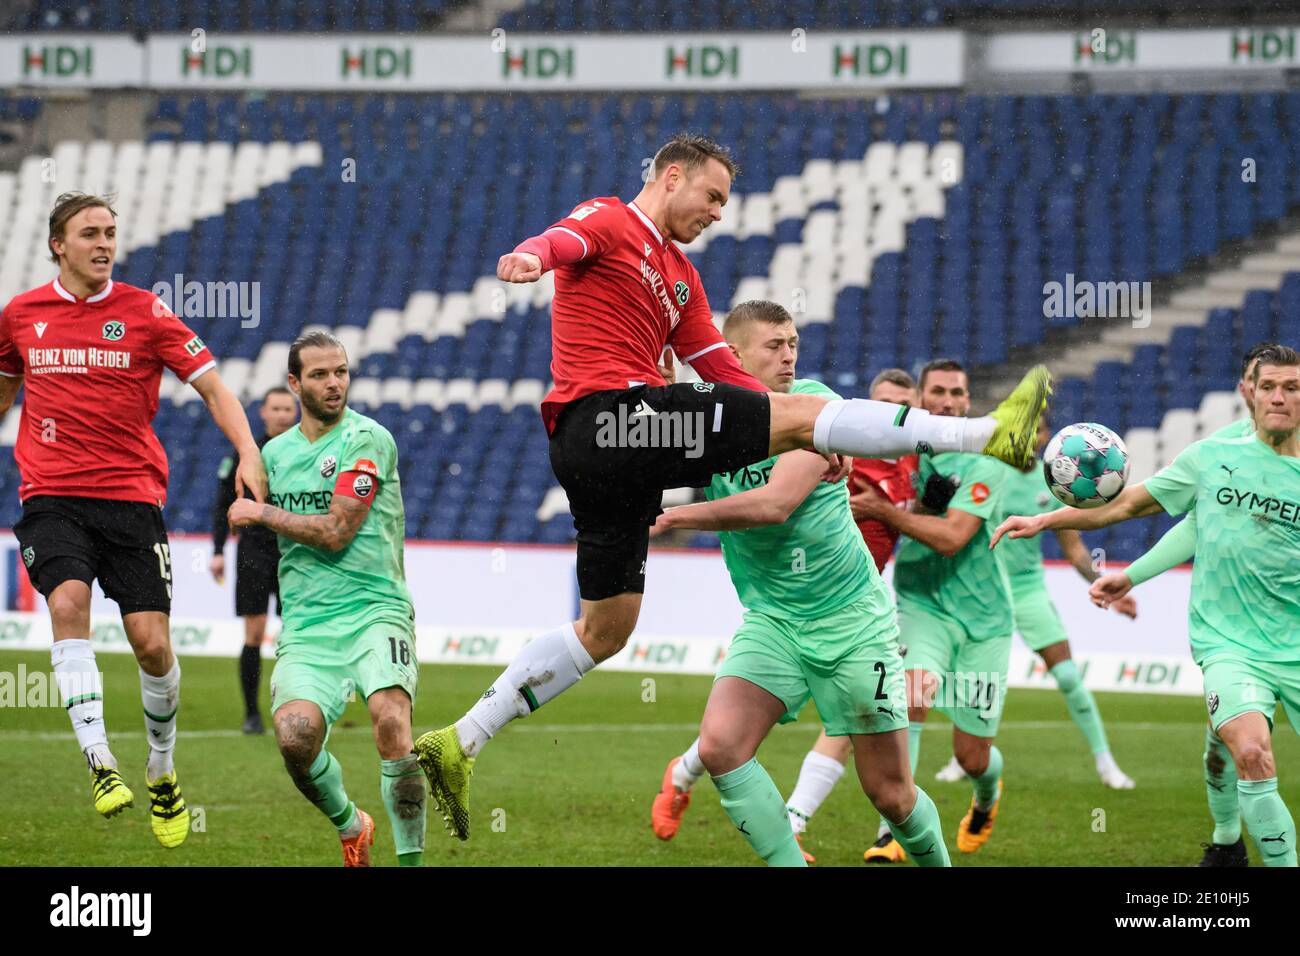 Hanover, Germany. 03rd Jan, 2021. Football: 2. Bundesliga, Hannover 96 - SV Sandhausen, Matchday 14 at HDI Arena. Hannover's Marcel Franke shoots at goal. Credit: Swen Pförtner/dpa - IMPORTANT NOTE: In accordance with the regulations of the DFL Deutsche Fußball Liga and/or the DFB Deutscher Fußball-Bund, it is prohibited to use or have used photographs taken in the stadium and/or of the match in the form of sequence pictures and/or video-like photo series./dpa/Alamy Live News Stock Photo